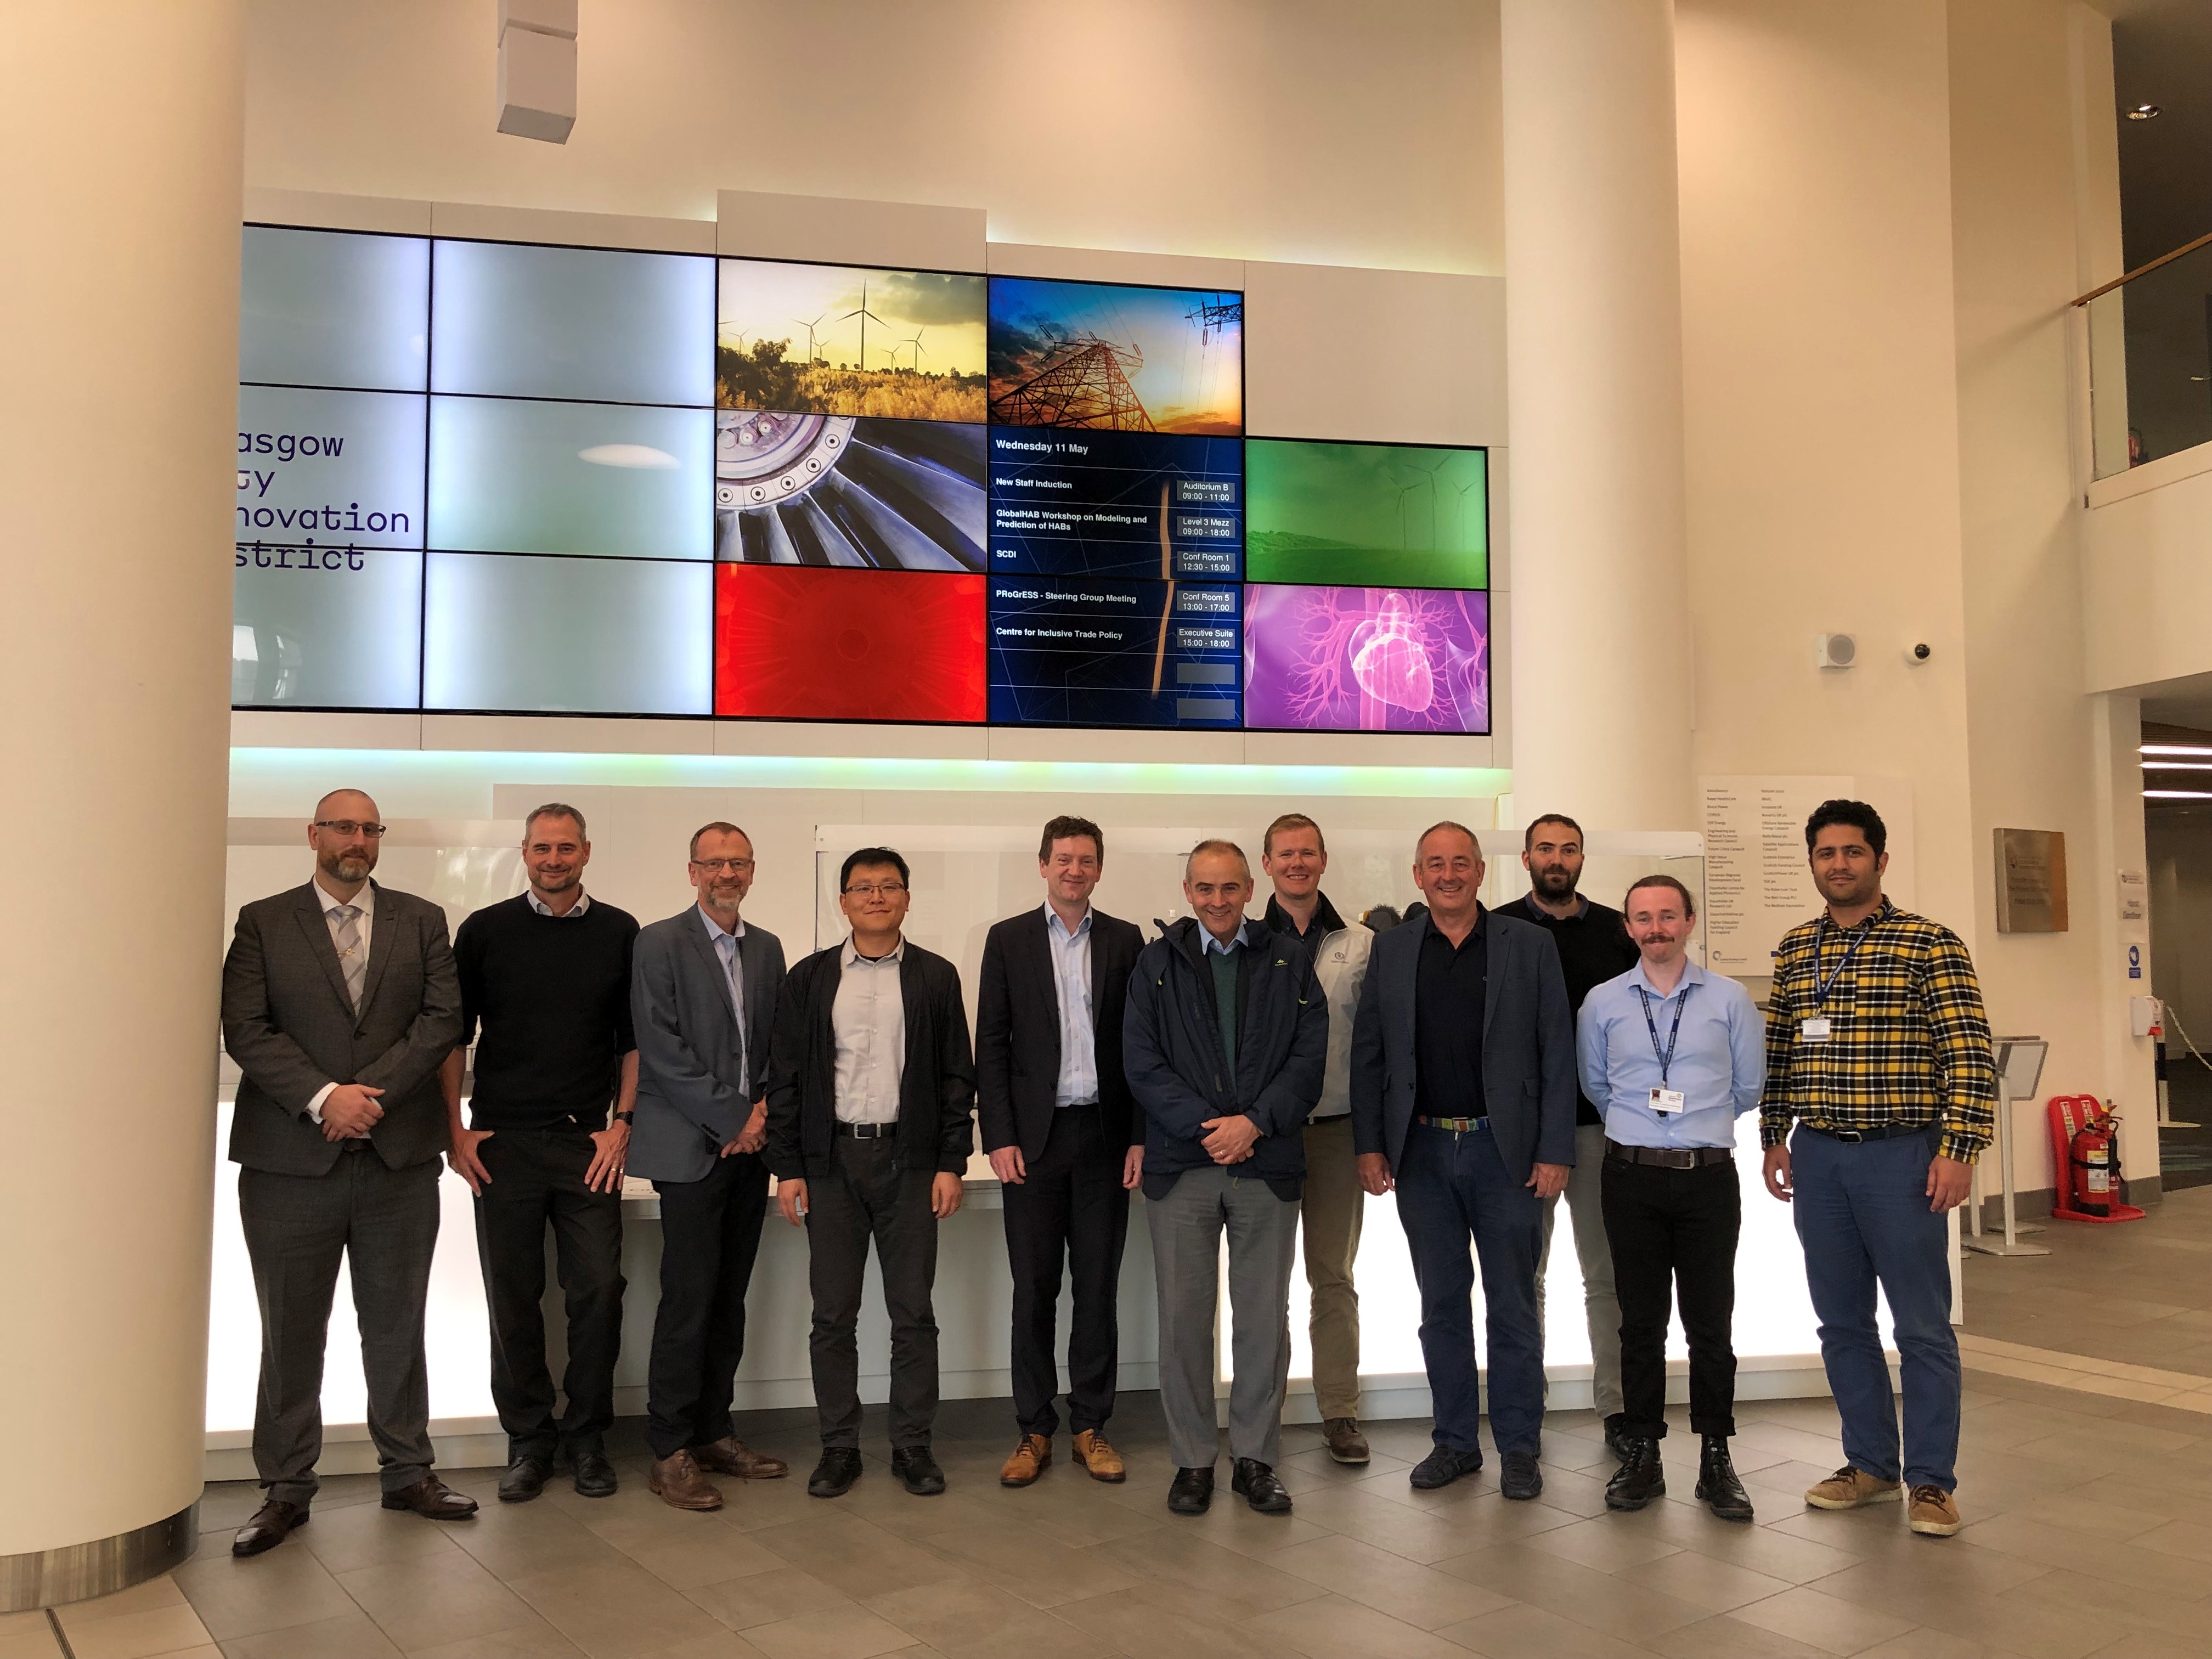 Image of attendees of launch ProGrESS meeting at university of strathclyde